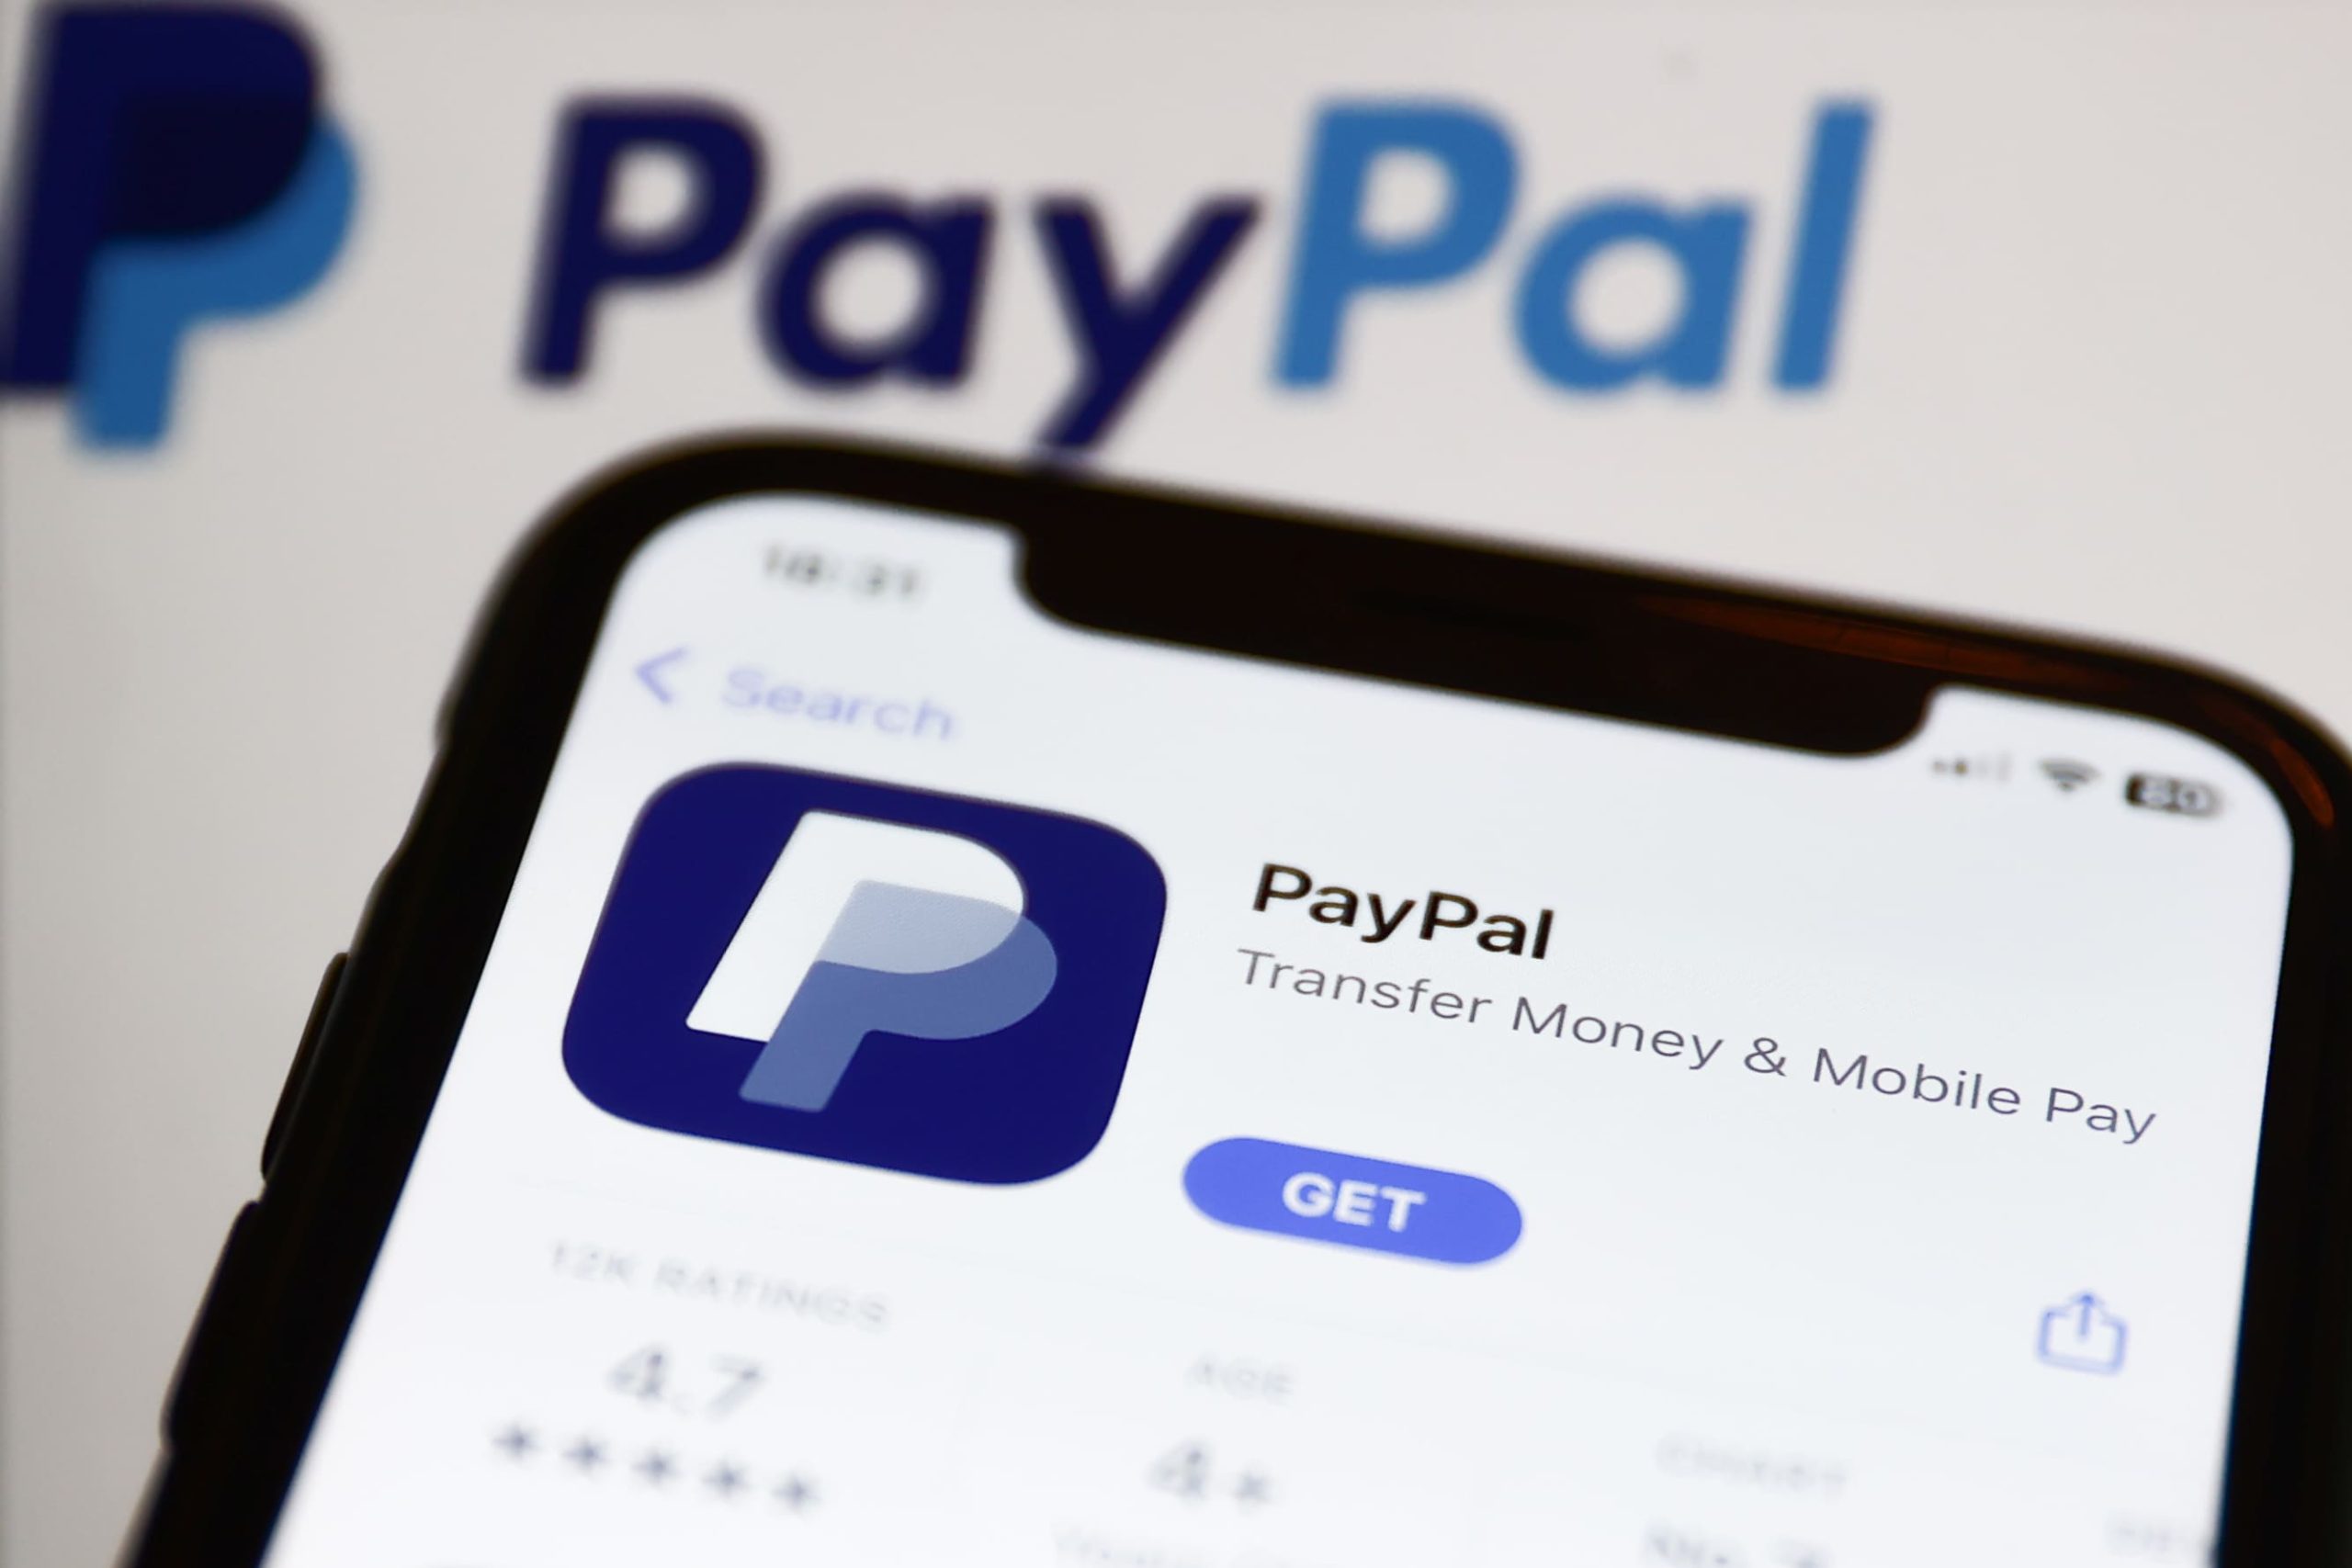 How To Send Money Using PayPal App